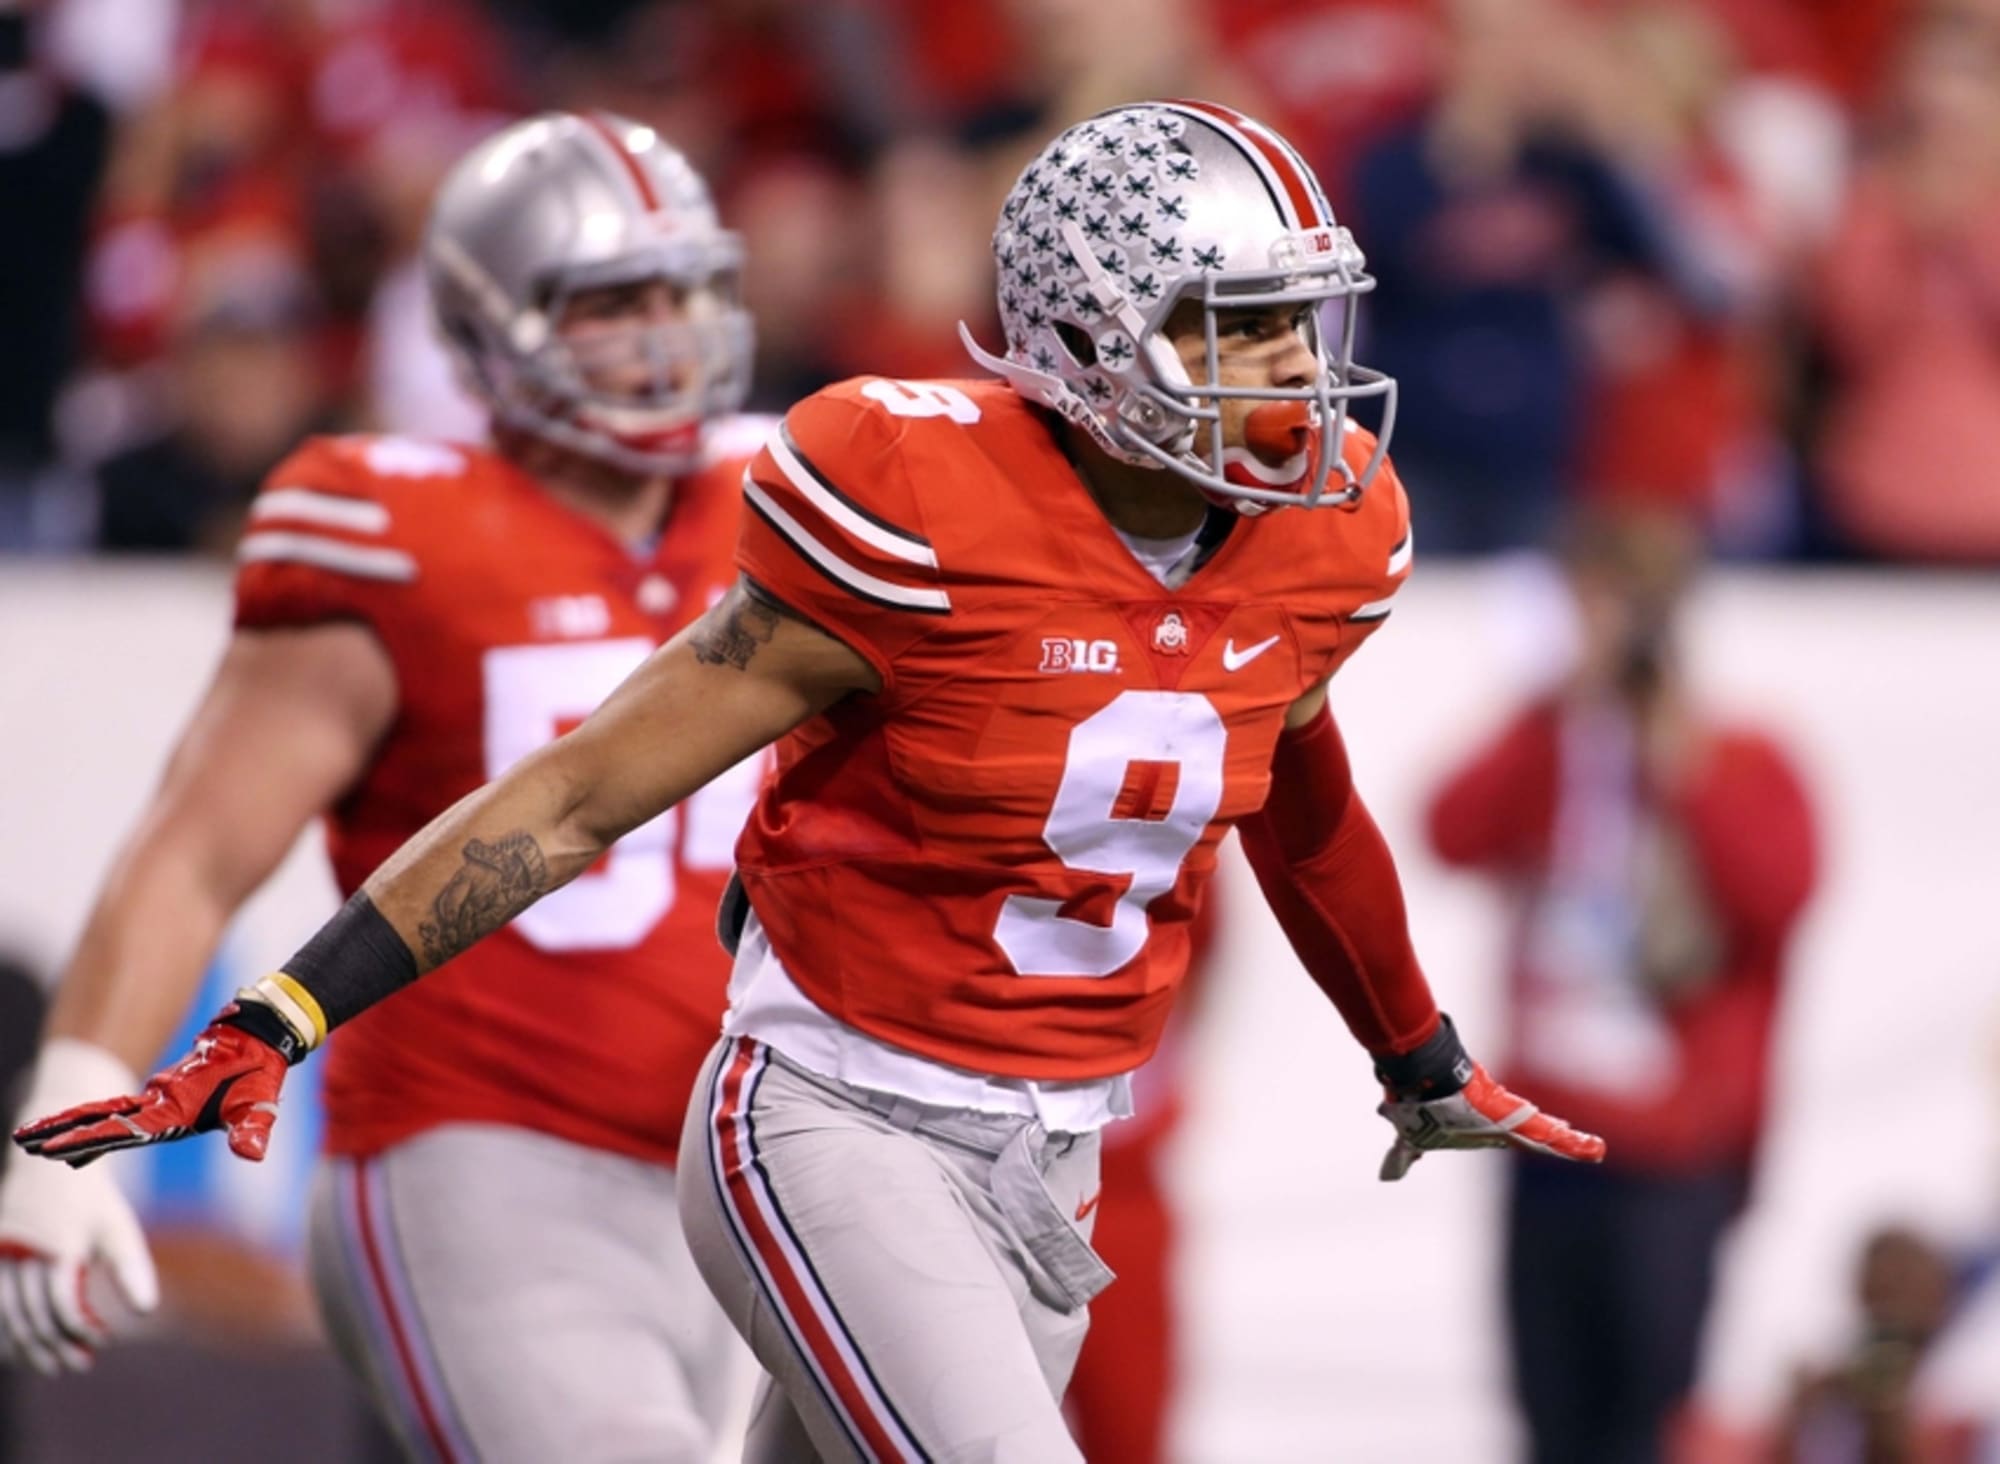 Ohio State Vs Wisconsin Final Score Buckeyes Trounce Badgers For Big